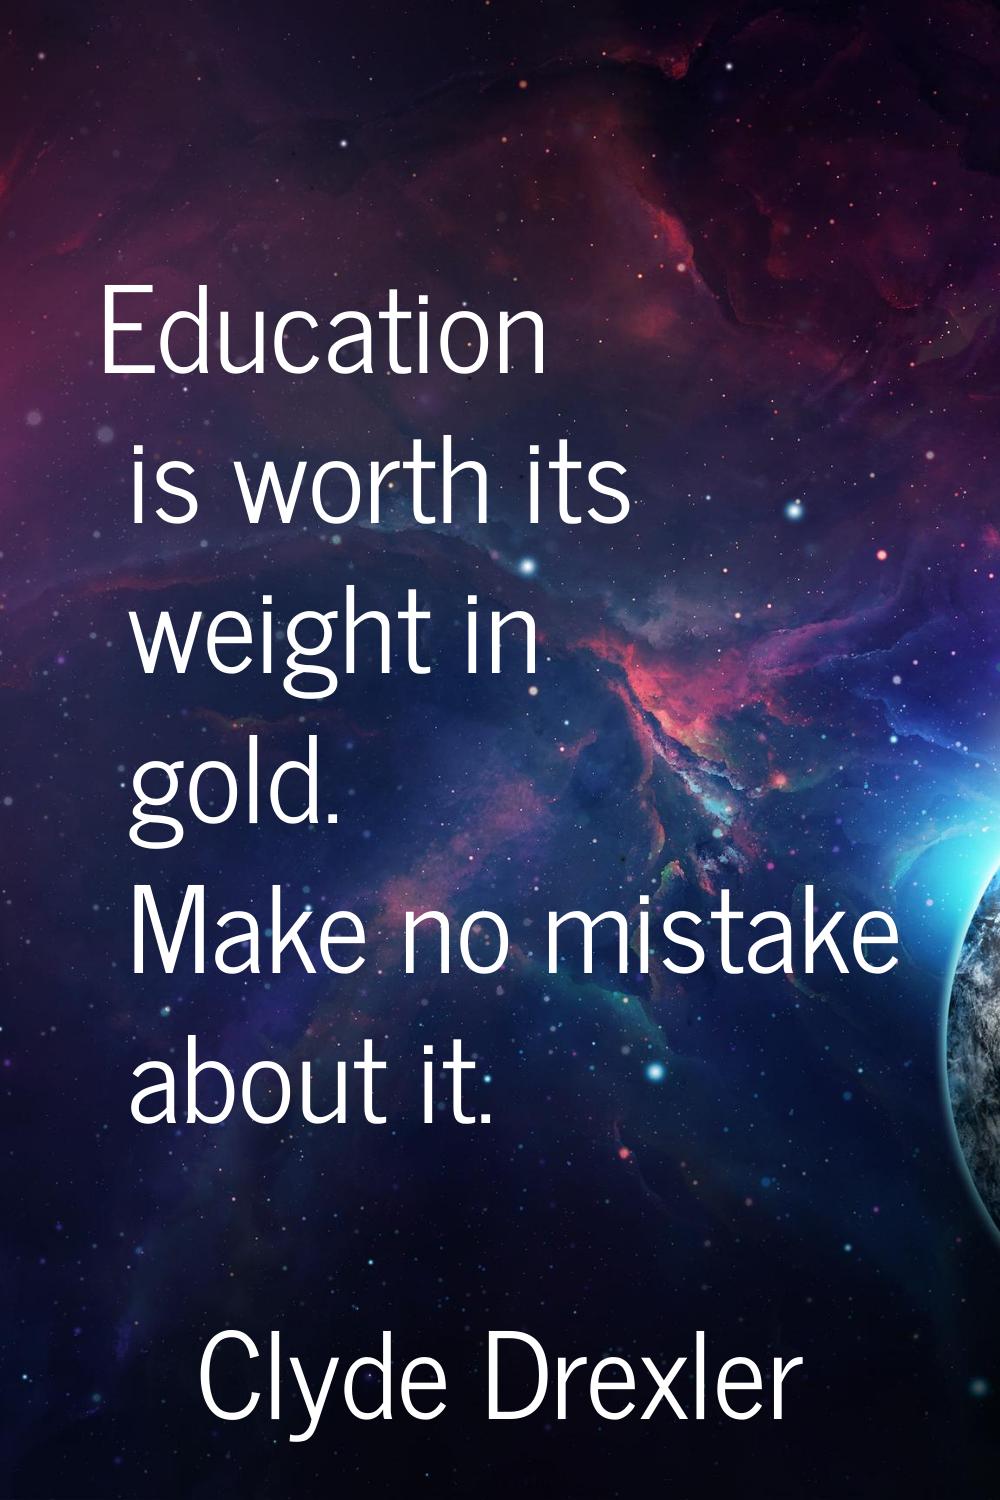 Education is worth its weight in gold. Make no mistake about it.